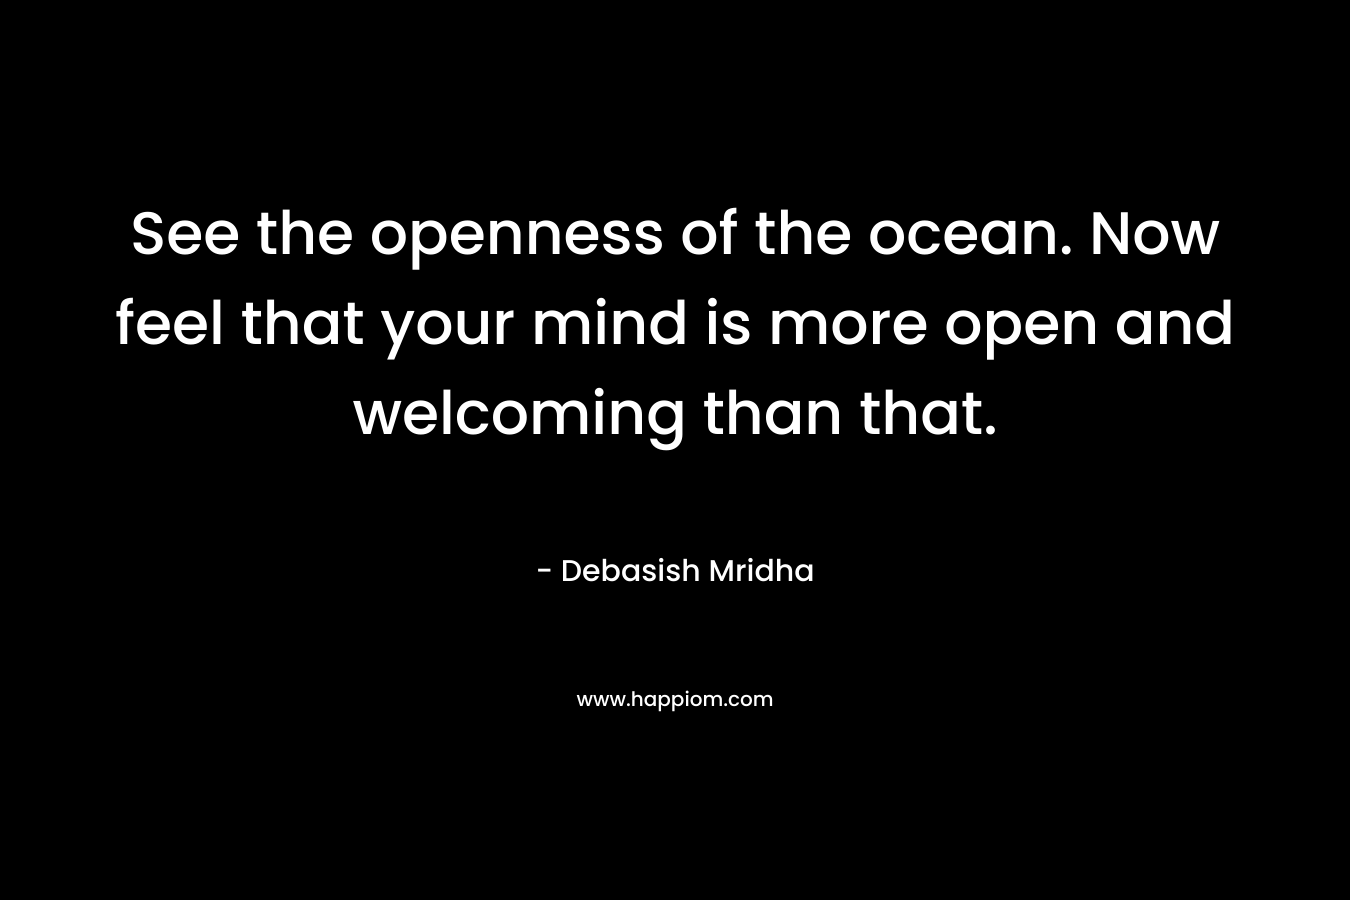 See the openness of the ocean. Now feel that your mind is more open and welcoming than that. – Debasish Mridha